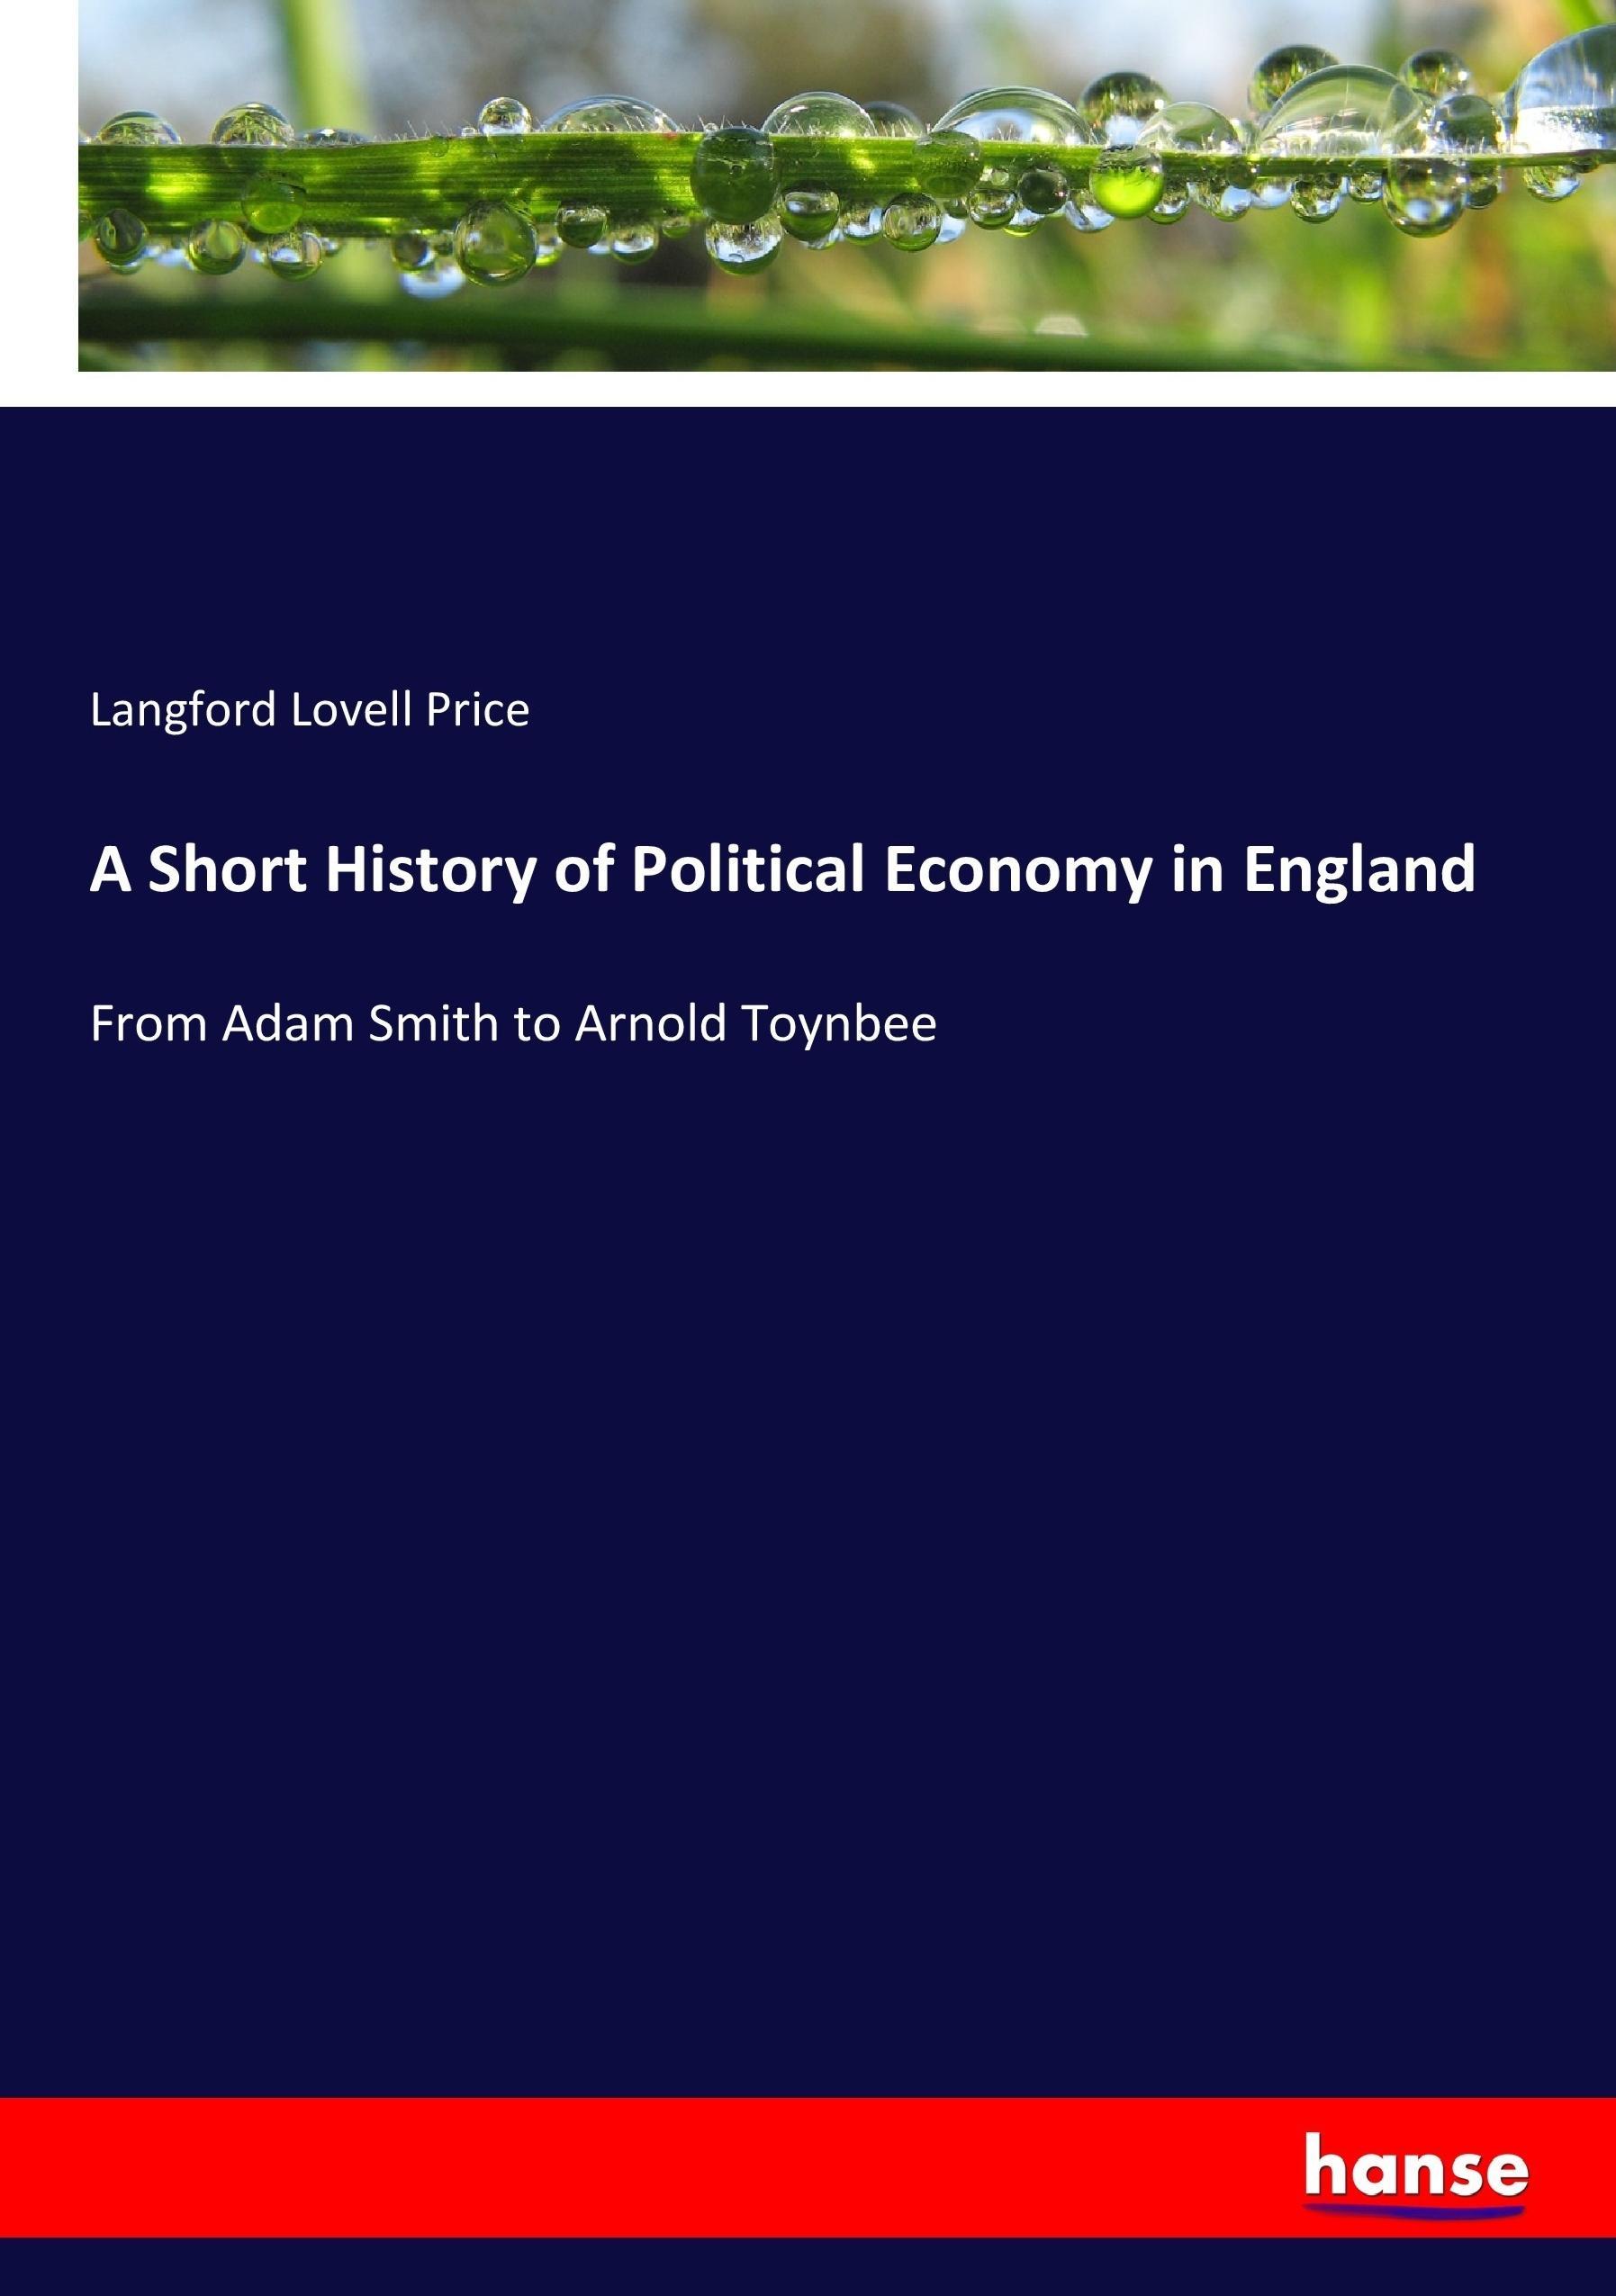 A Short History of Political Economy in England - Price, Langford Lovell